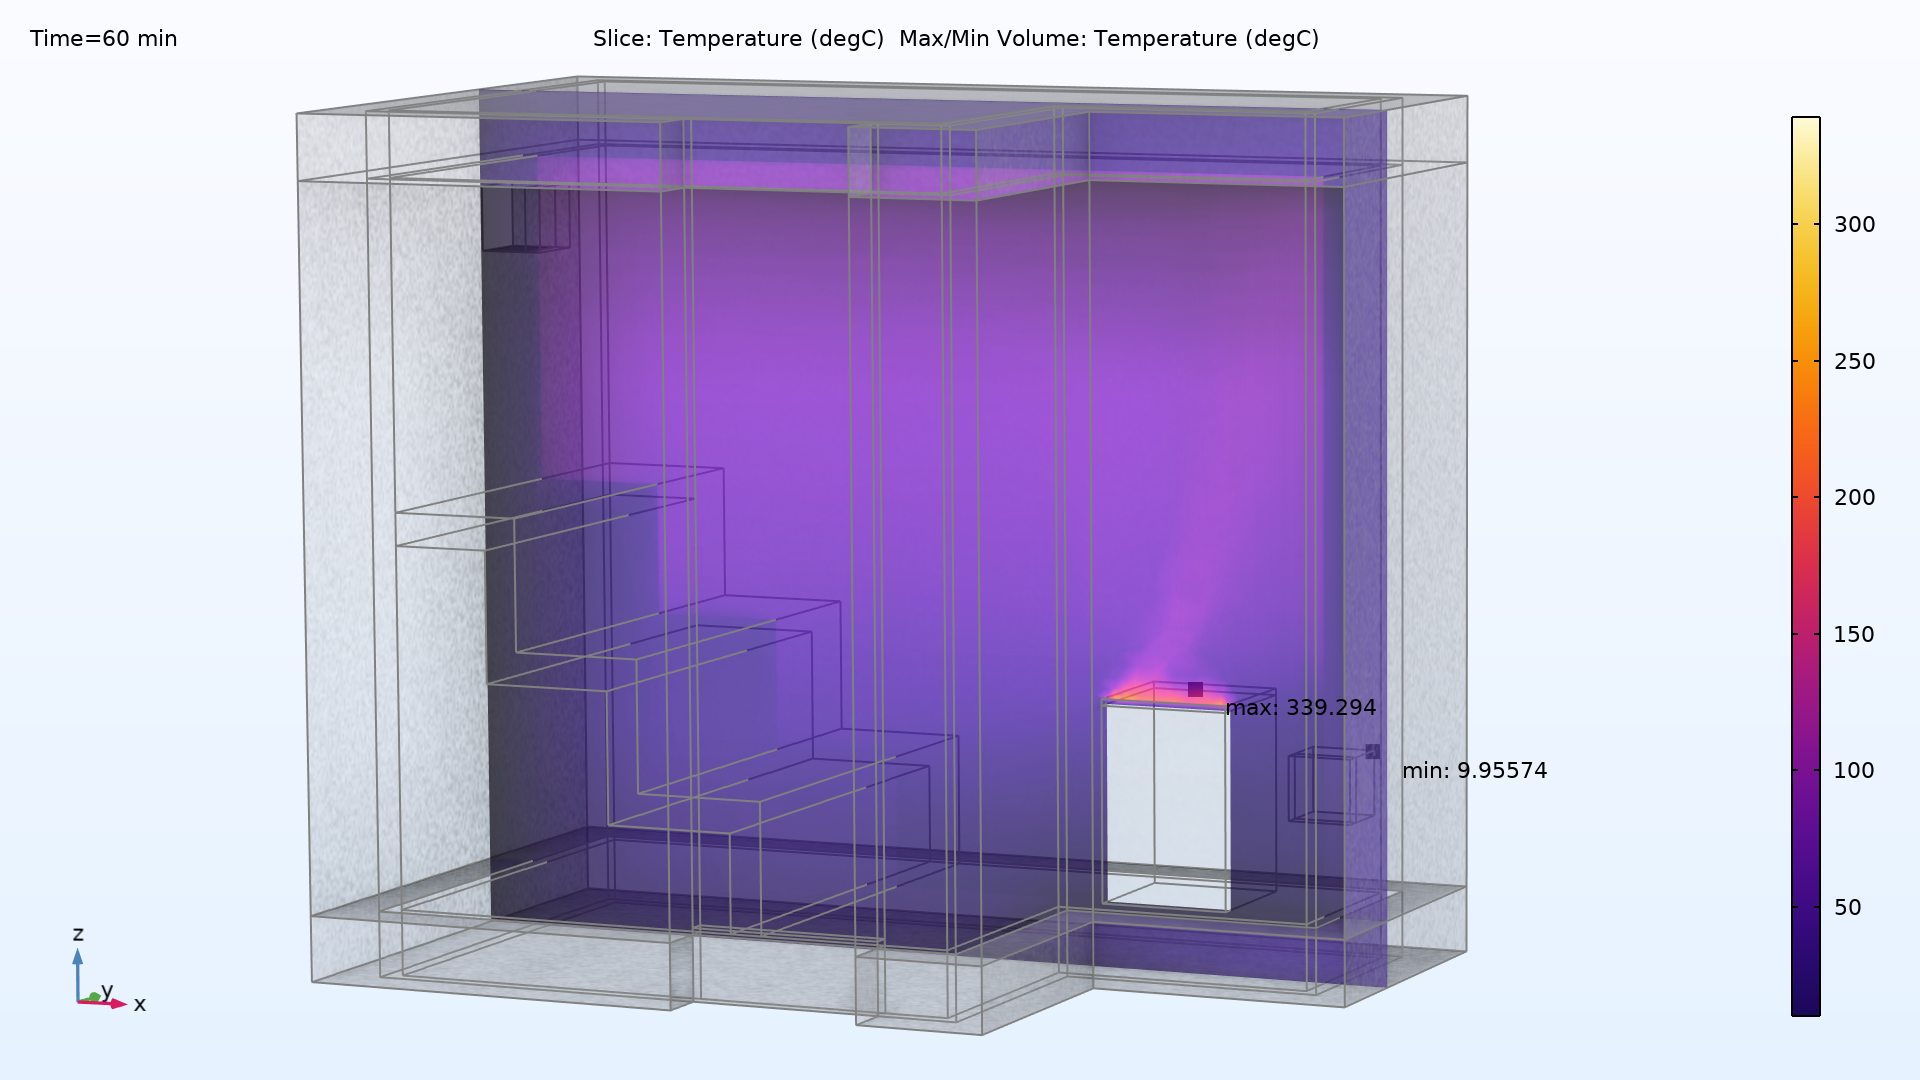 A plot showing the temperature distribution in the sauna after 60 minutes of heating with a HeatCamera color table. The top of the heater in the sauna is an orangish-yellow color, while the rest of the sauna is mostly purple.